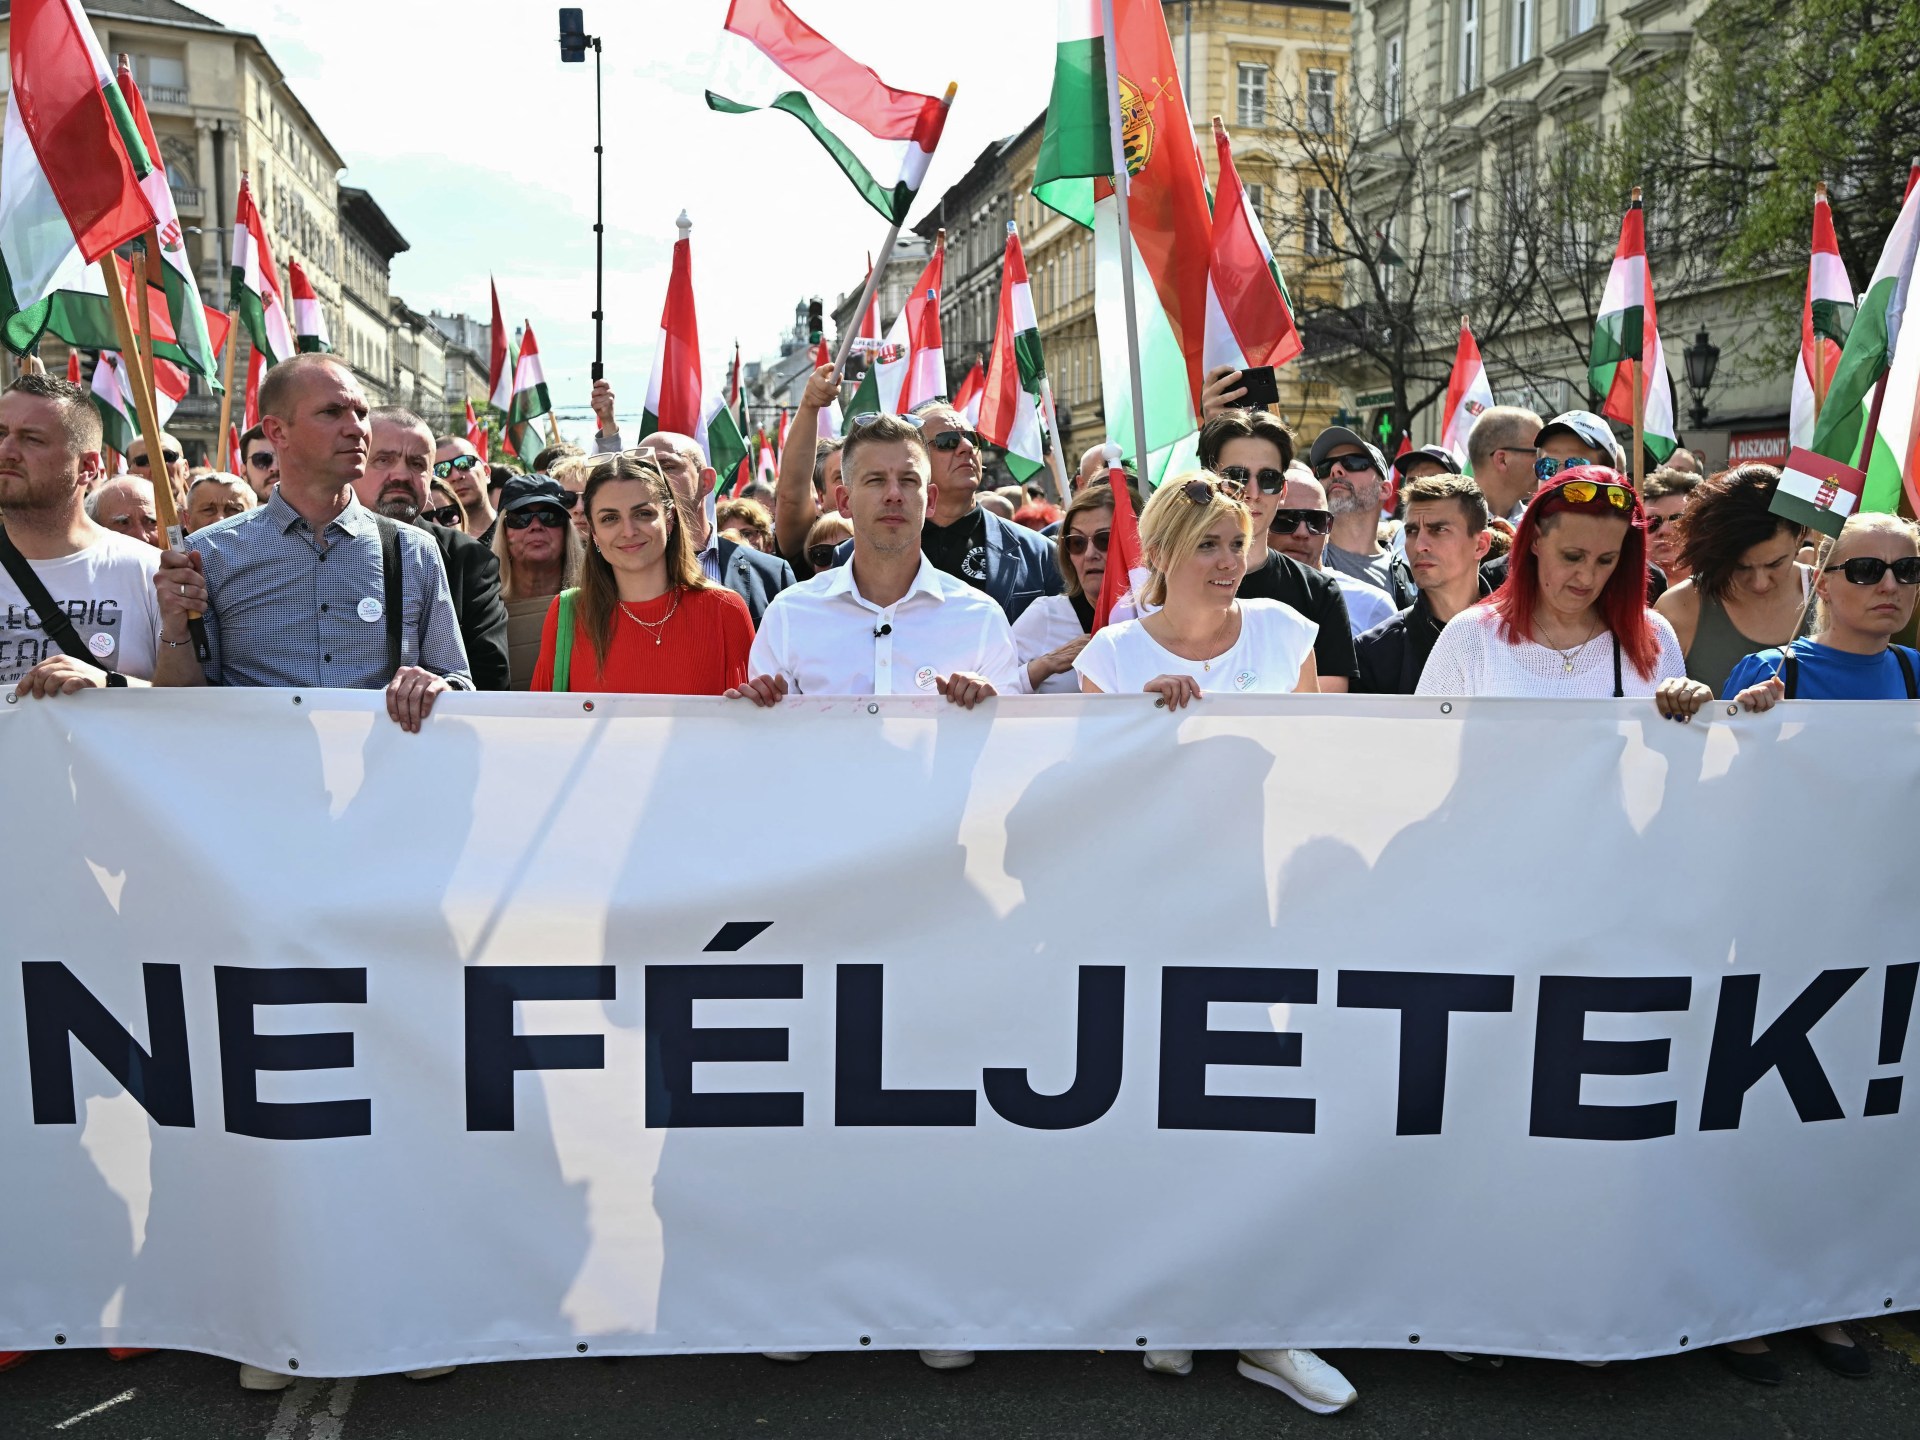 Thousands demonstrate in anti-Orban protest in Hungary